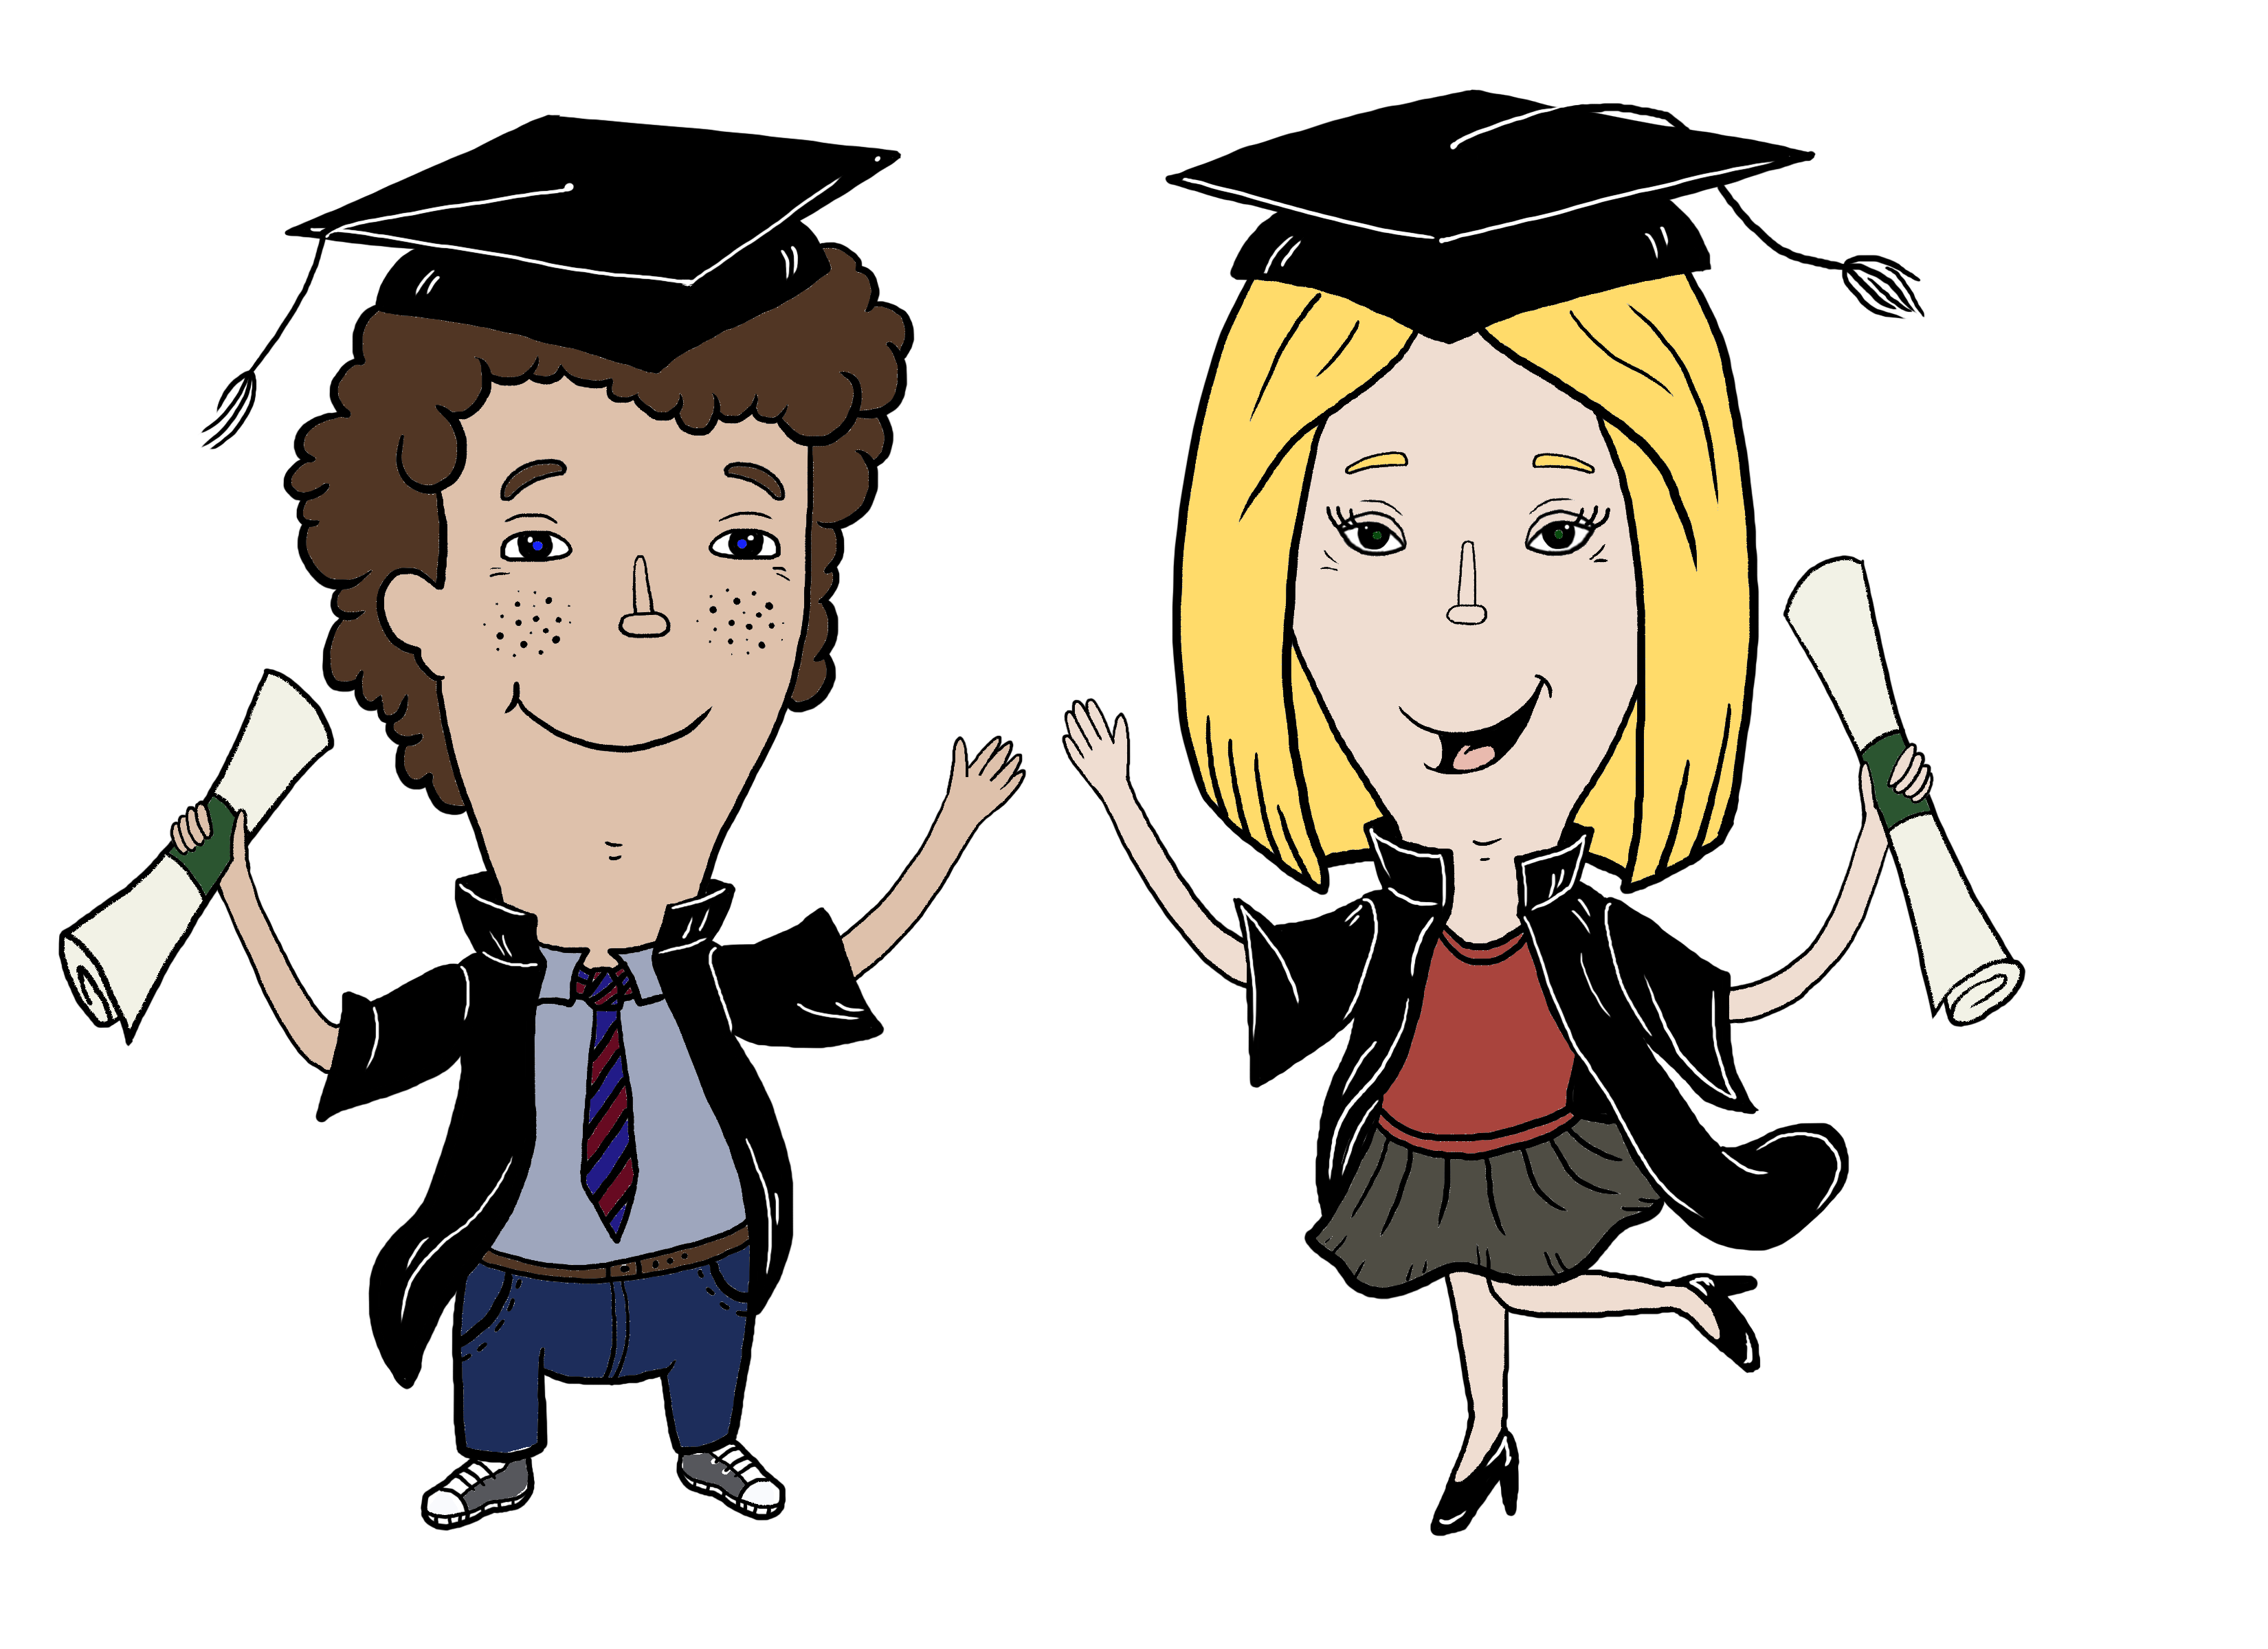 Coloured character illustrations of one female and one male graduate